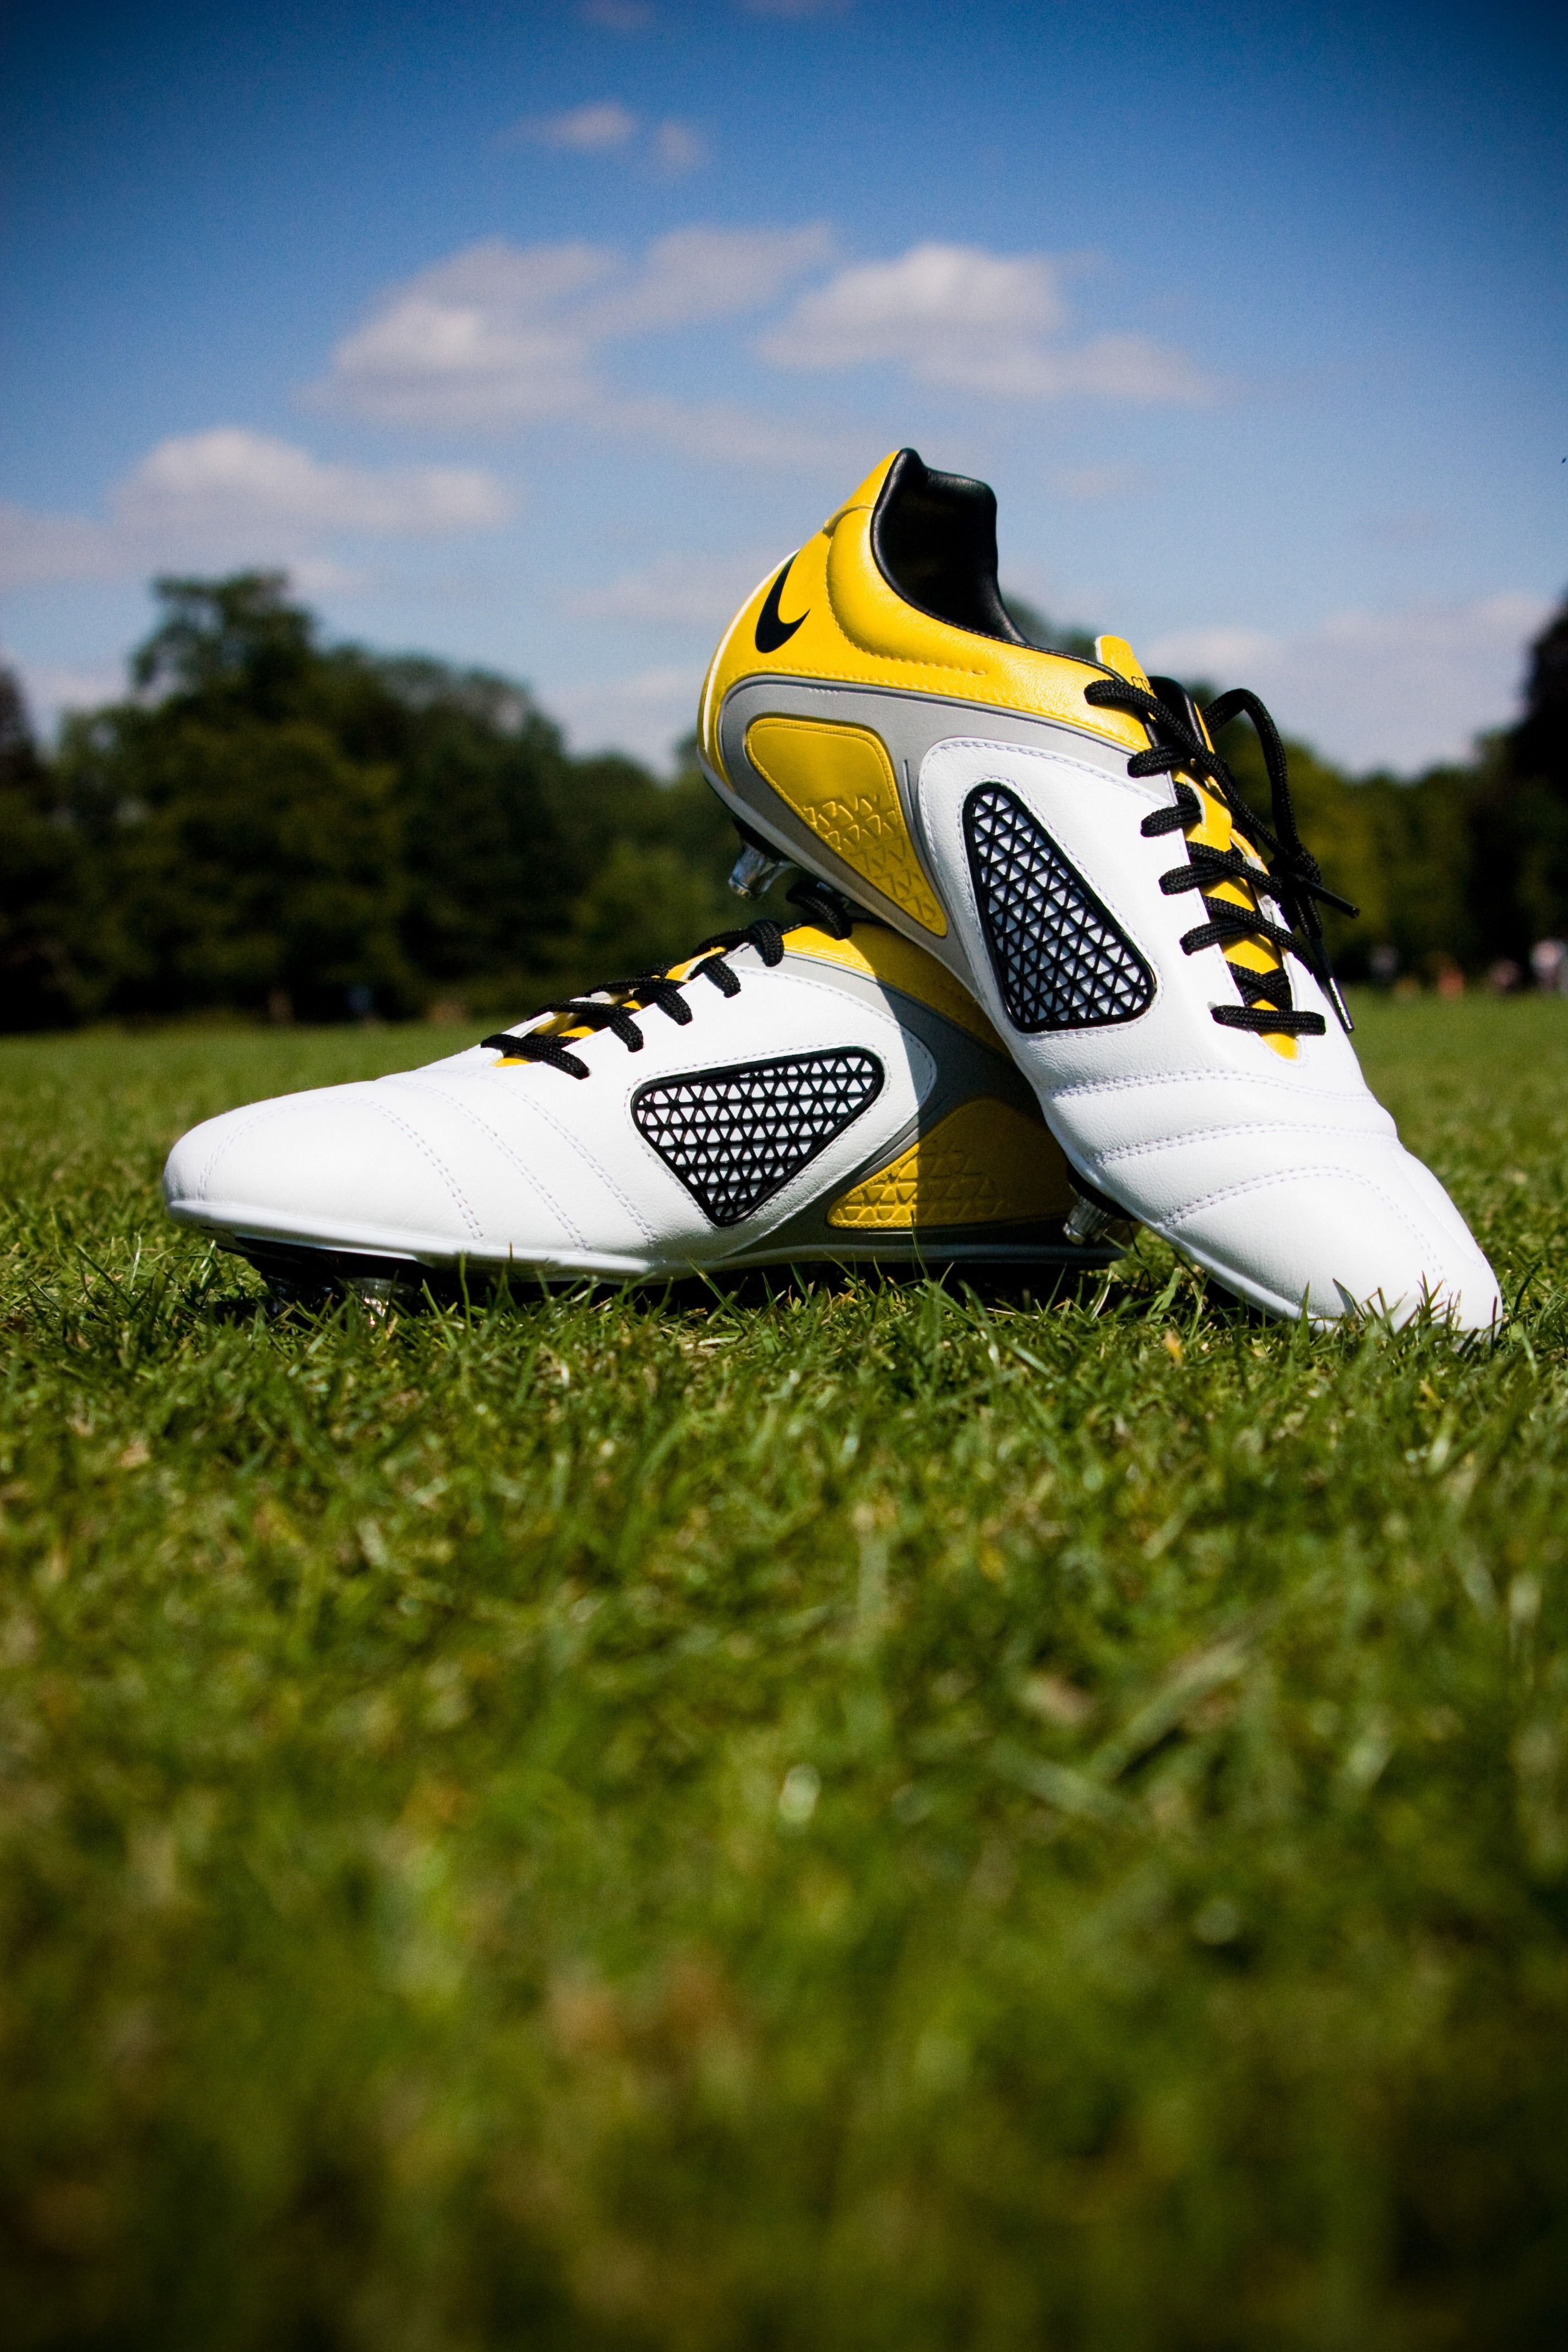 Pair Of White And Yellow Nike Cleats · Free